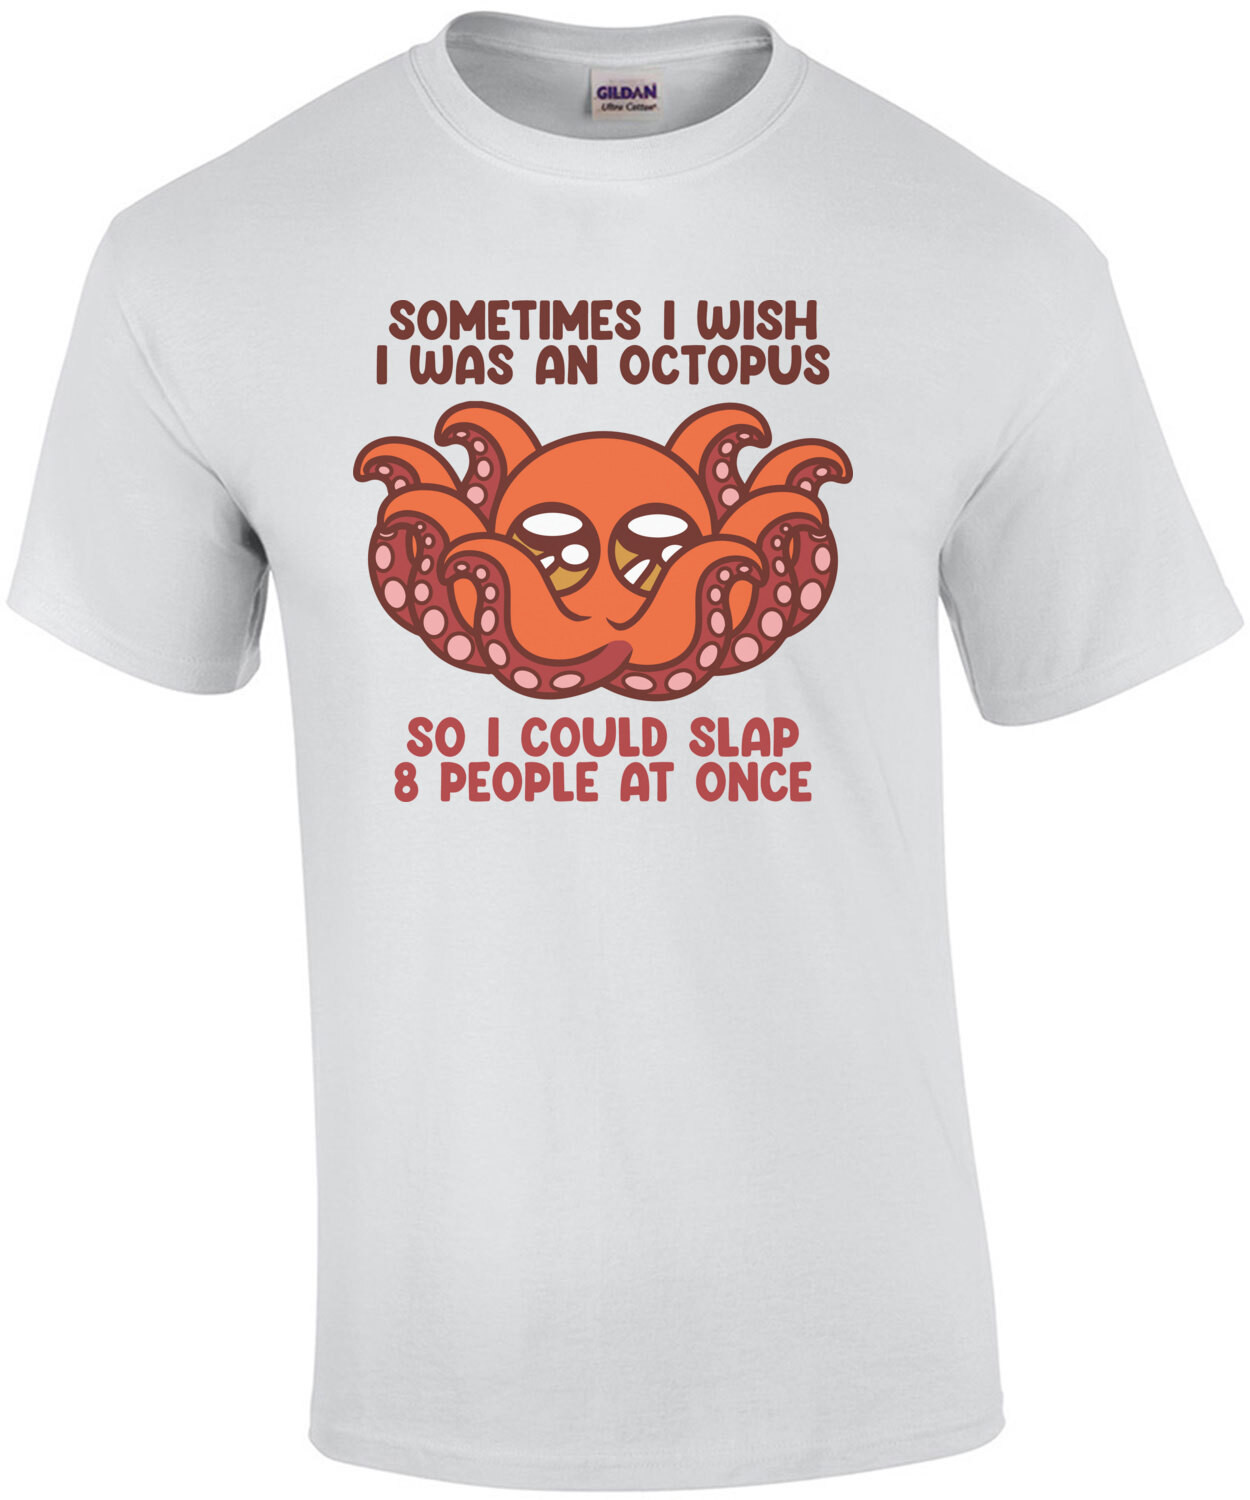 Sometimes I Wish I Was an Octopus Funny Shirt